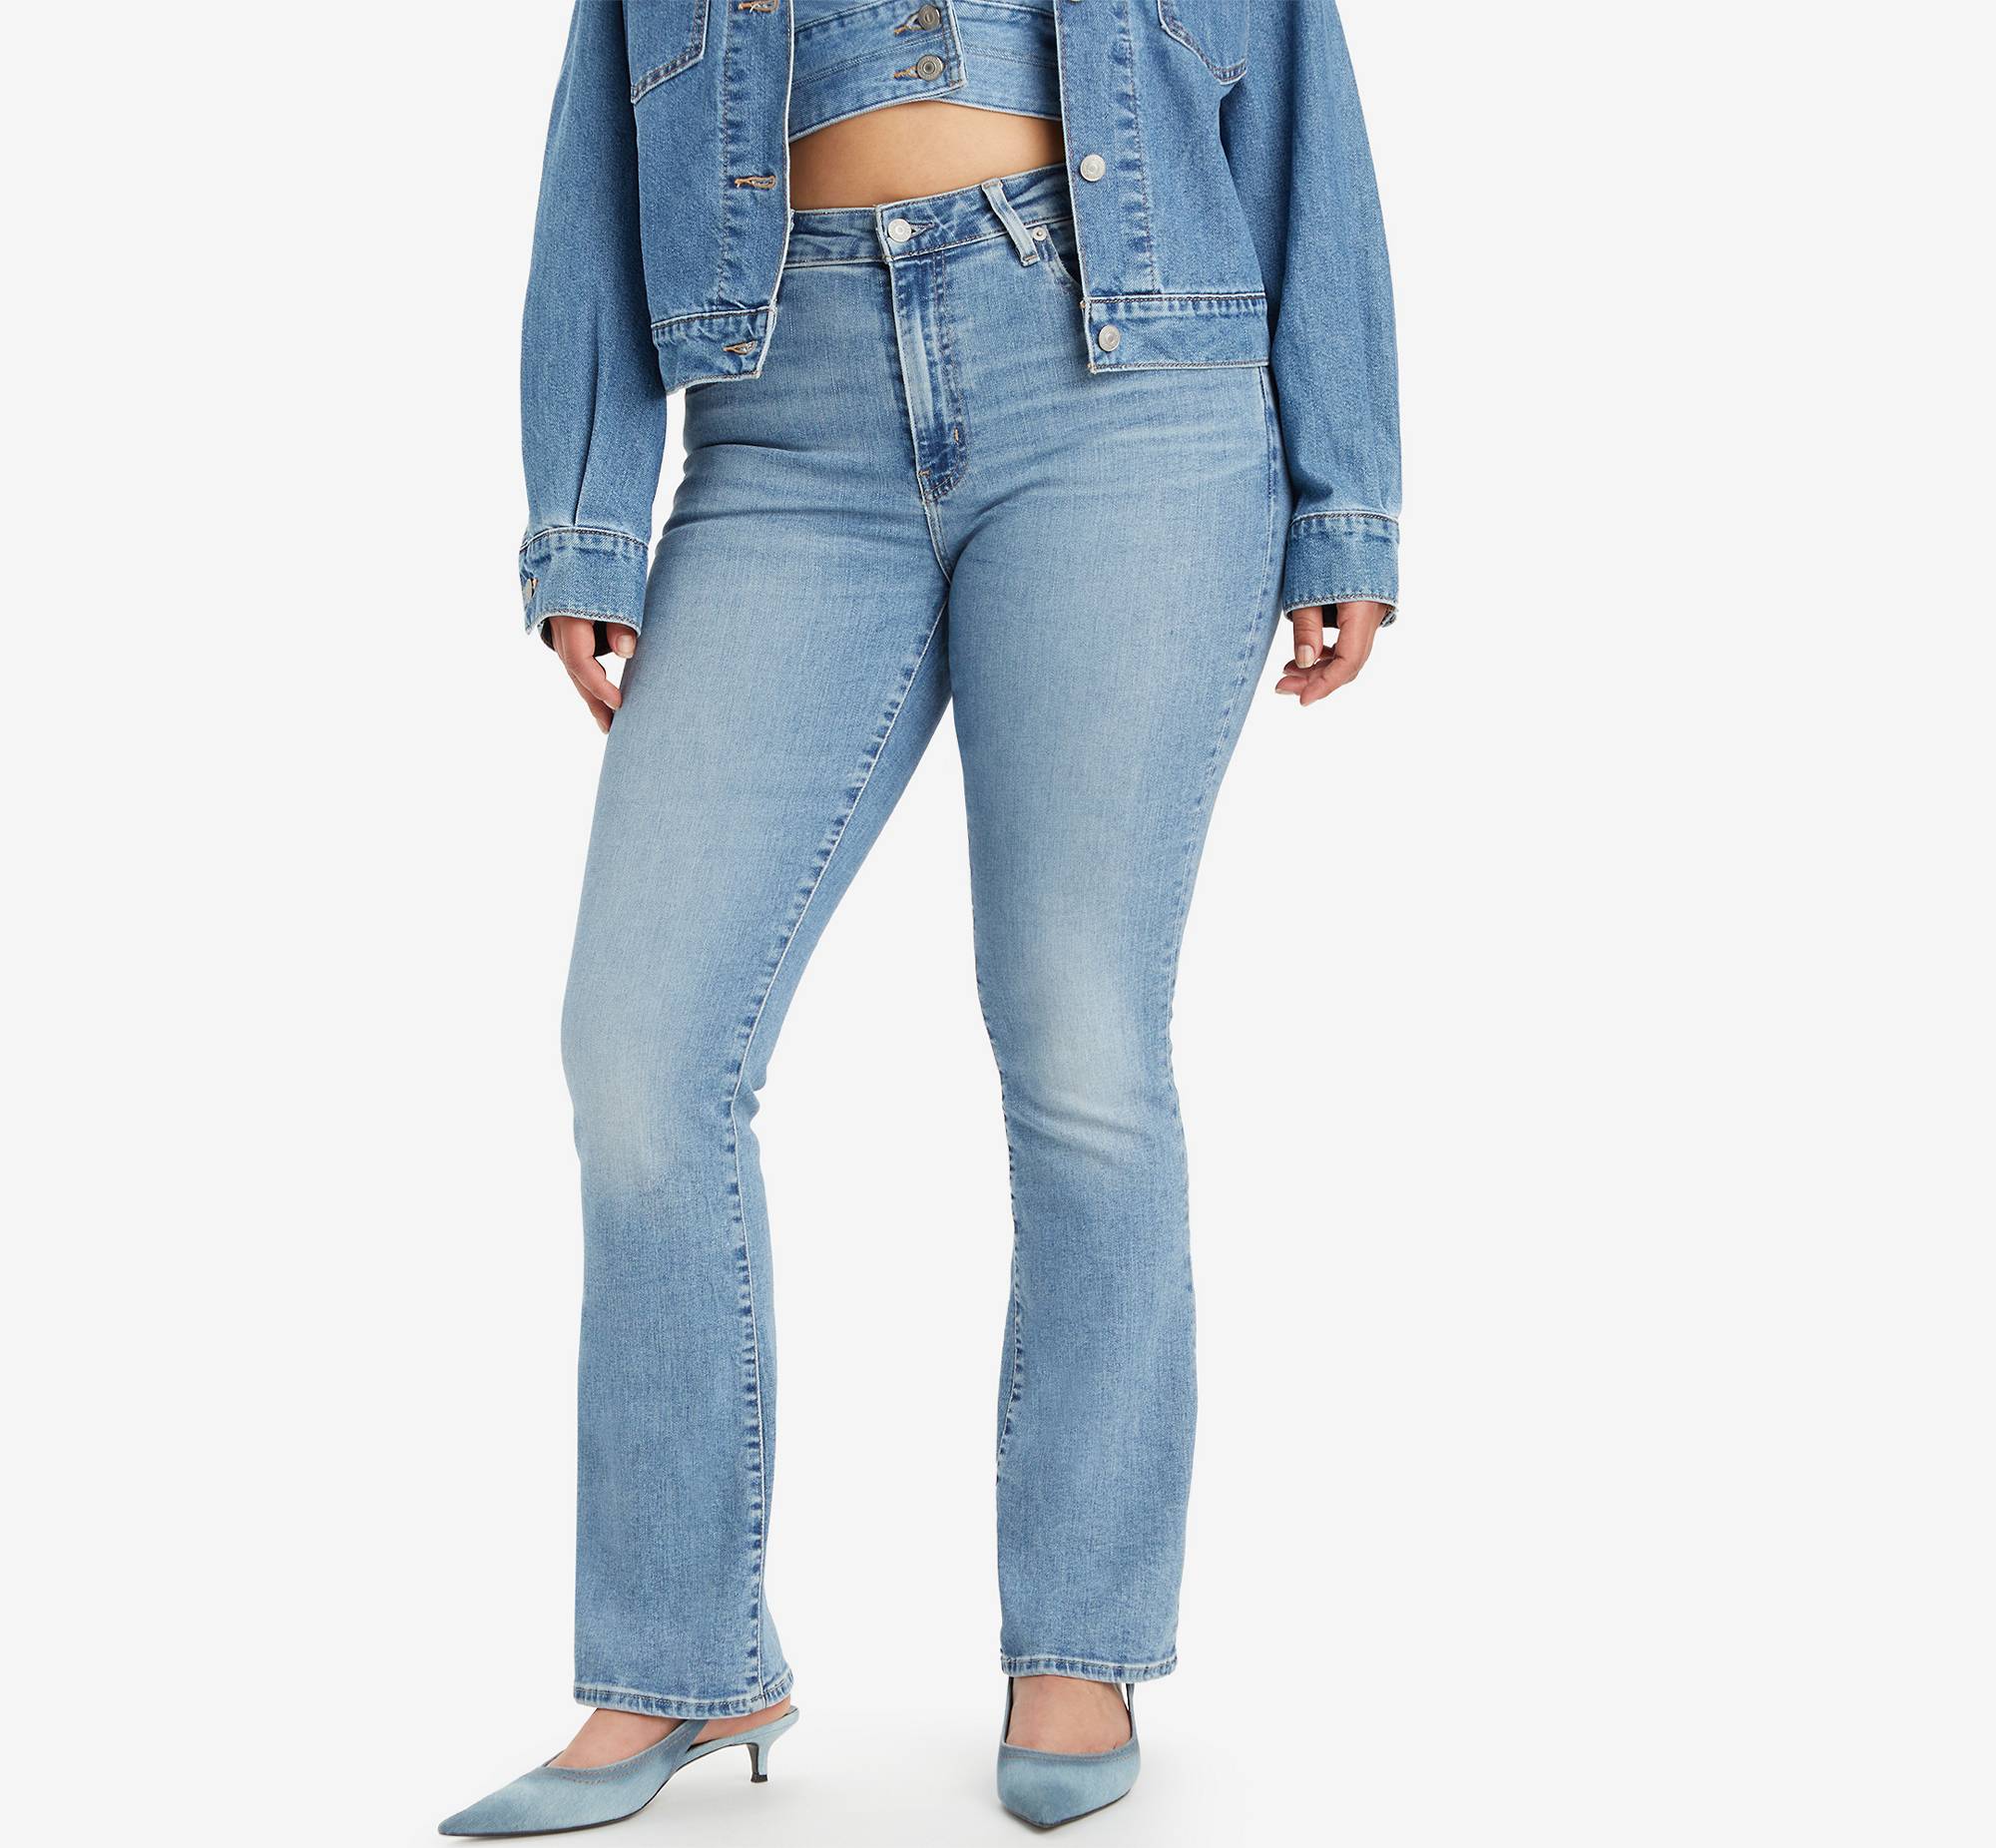 725™ High Rise Bootcut Jeans 5